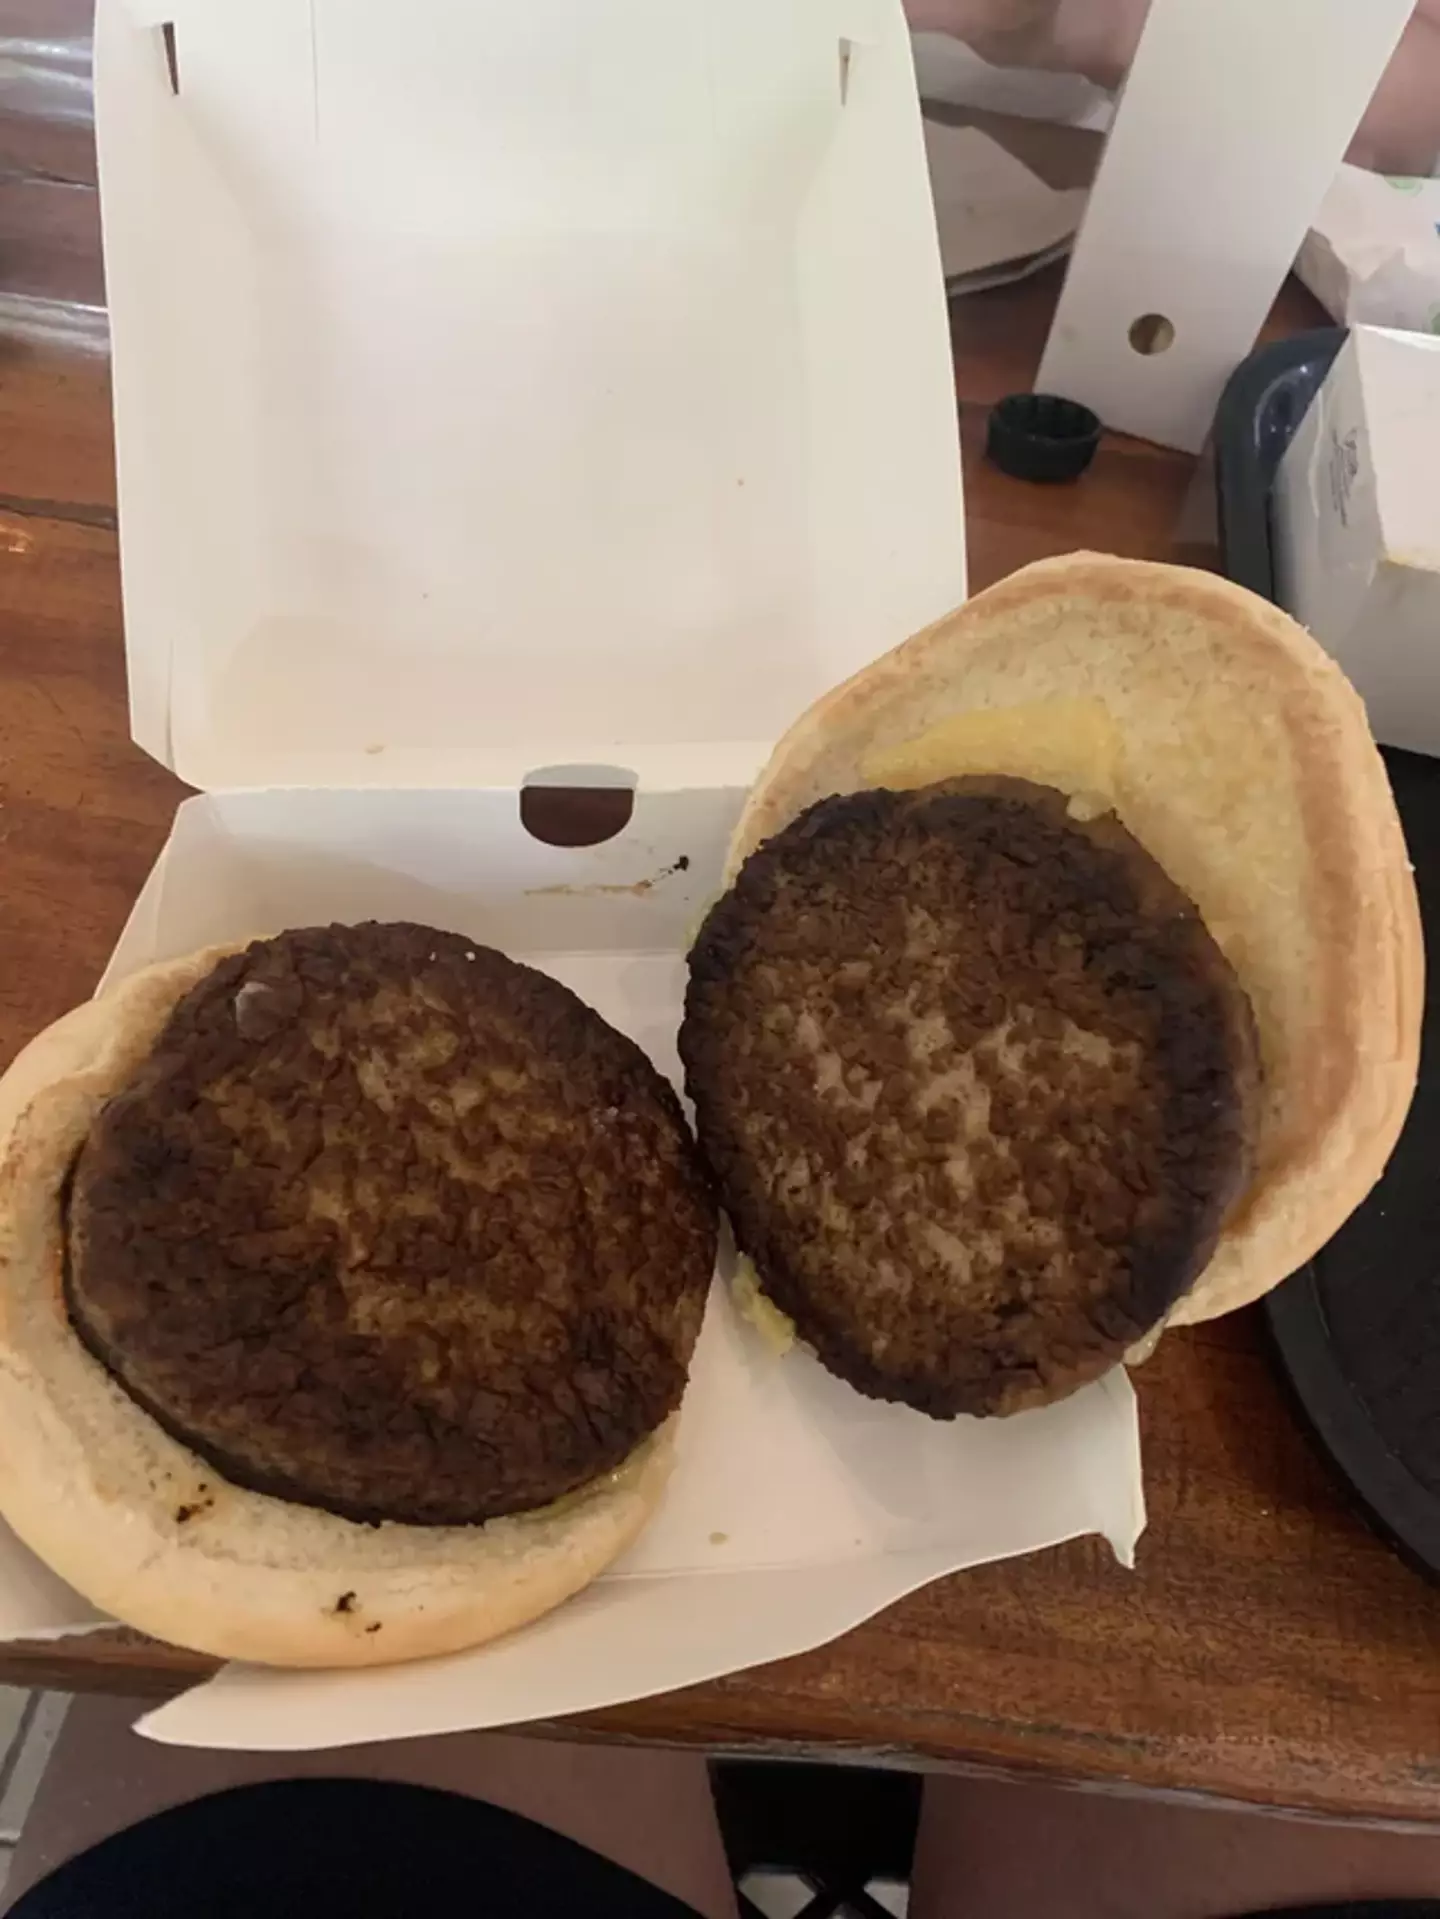 The burger cost them AU $17.